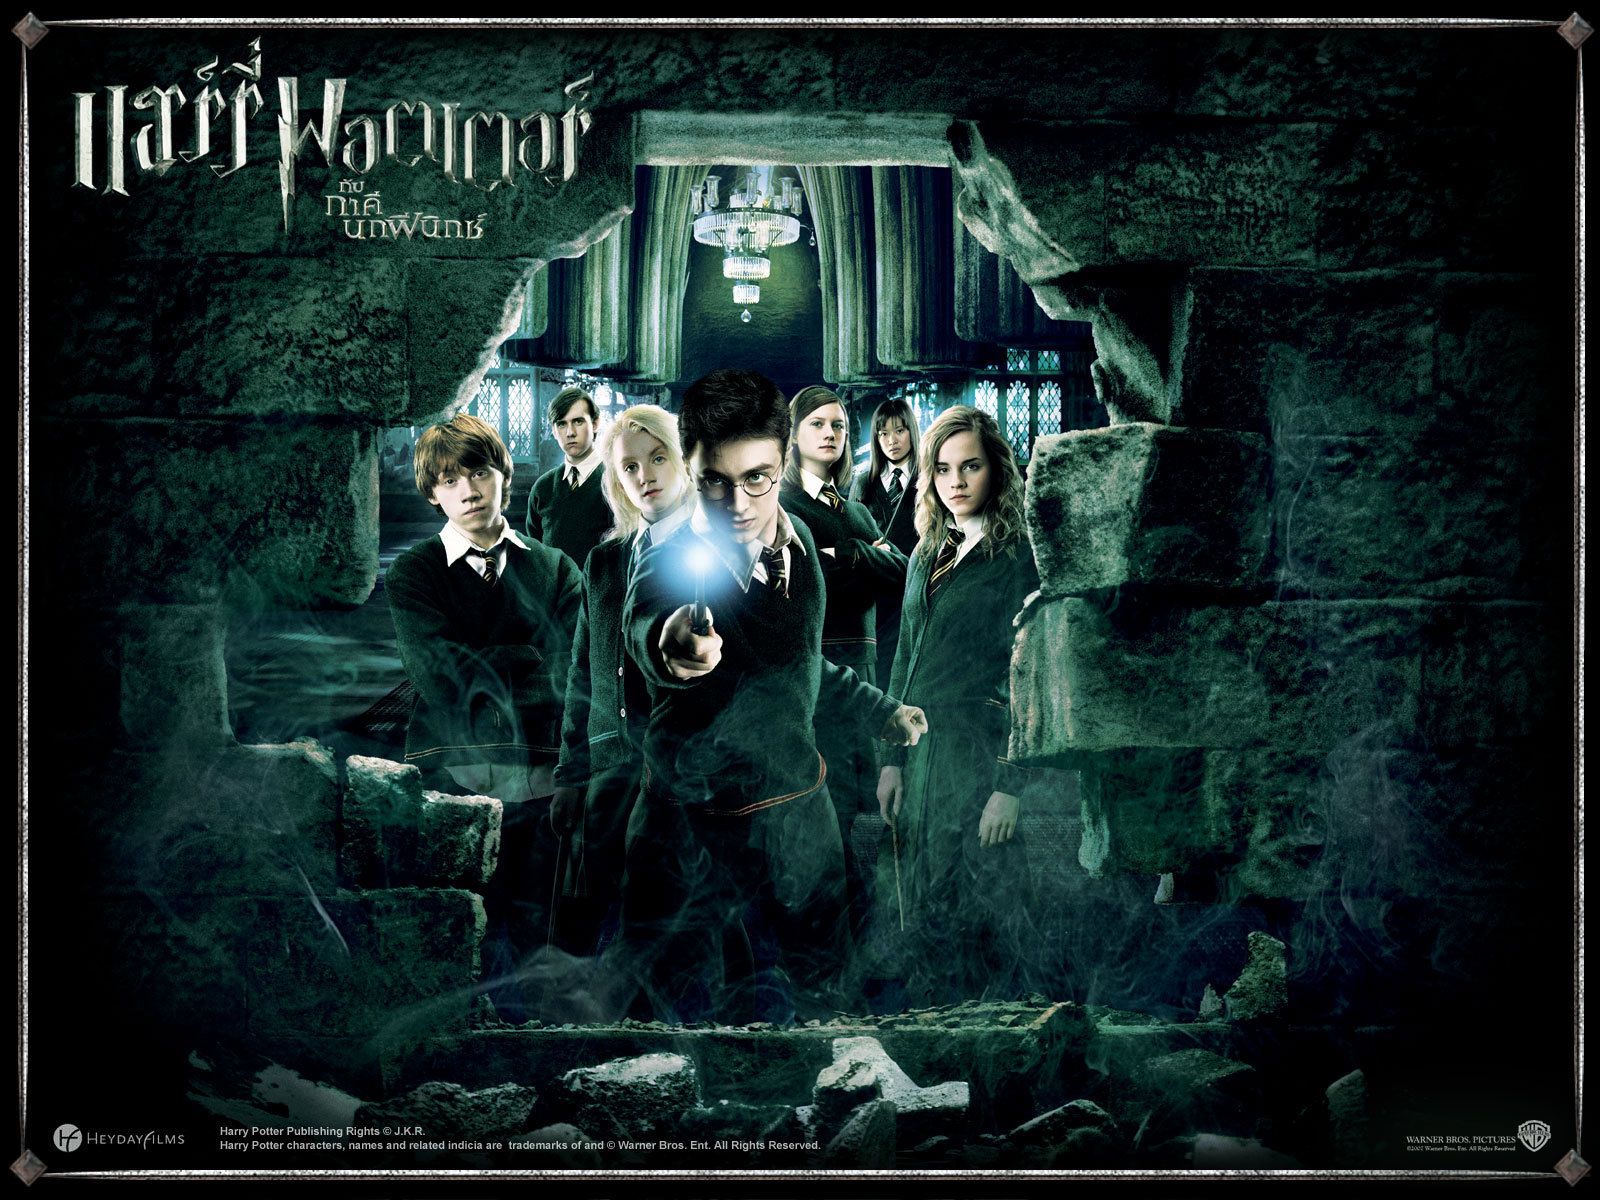 Harry Potter Wallpaper: Harry Potter. Harry potter wallpaper, Harry potter background, Harry potter picture